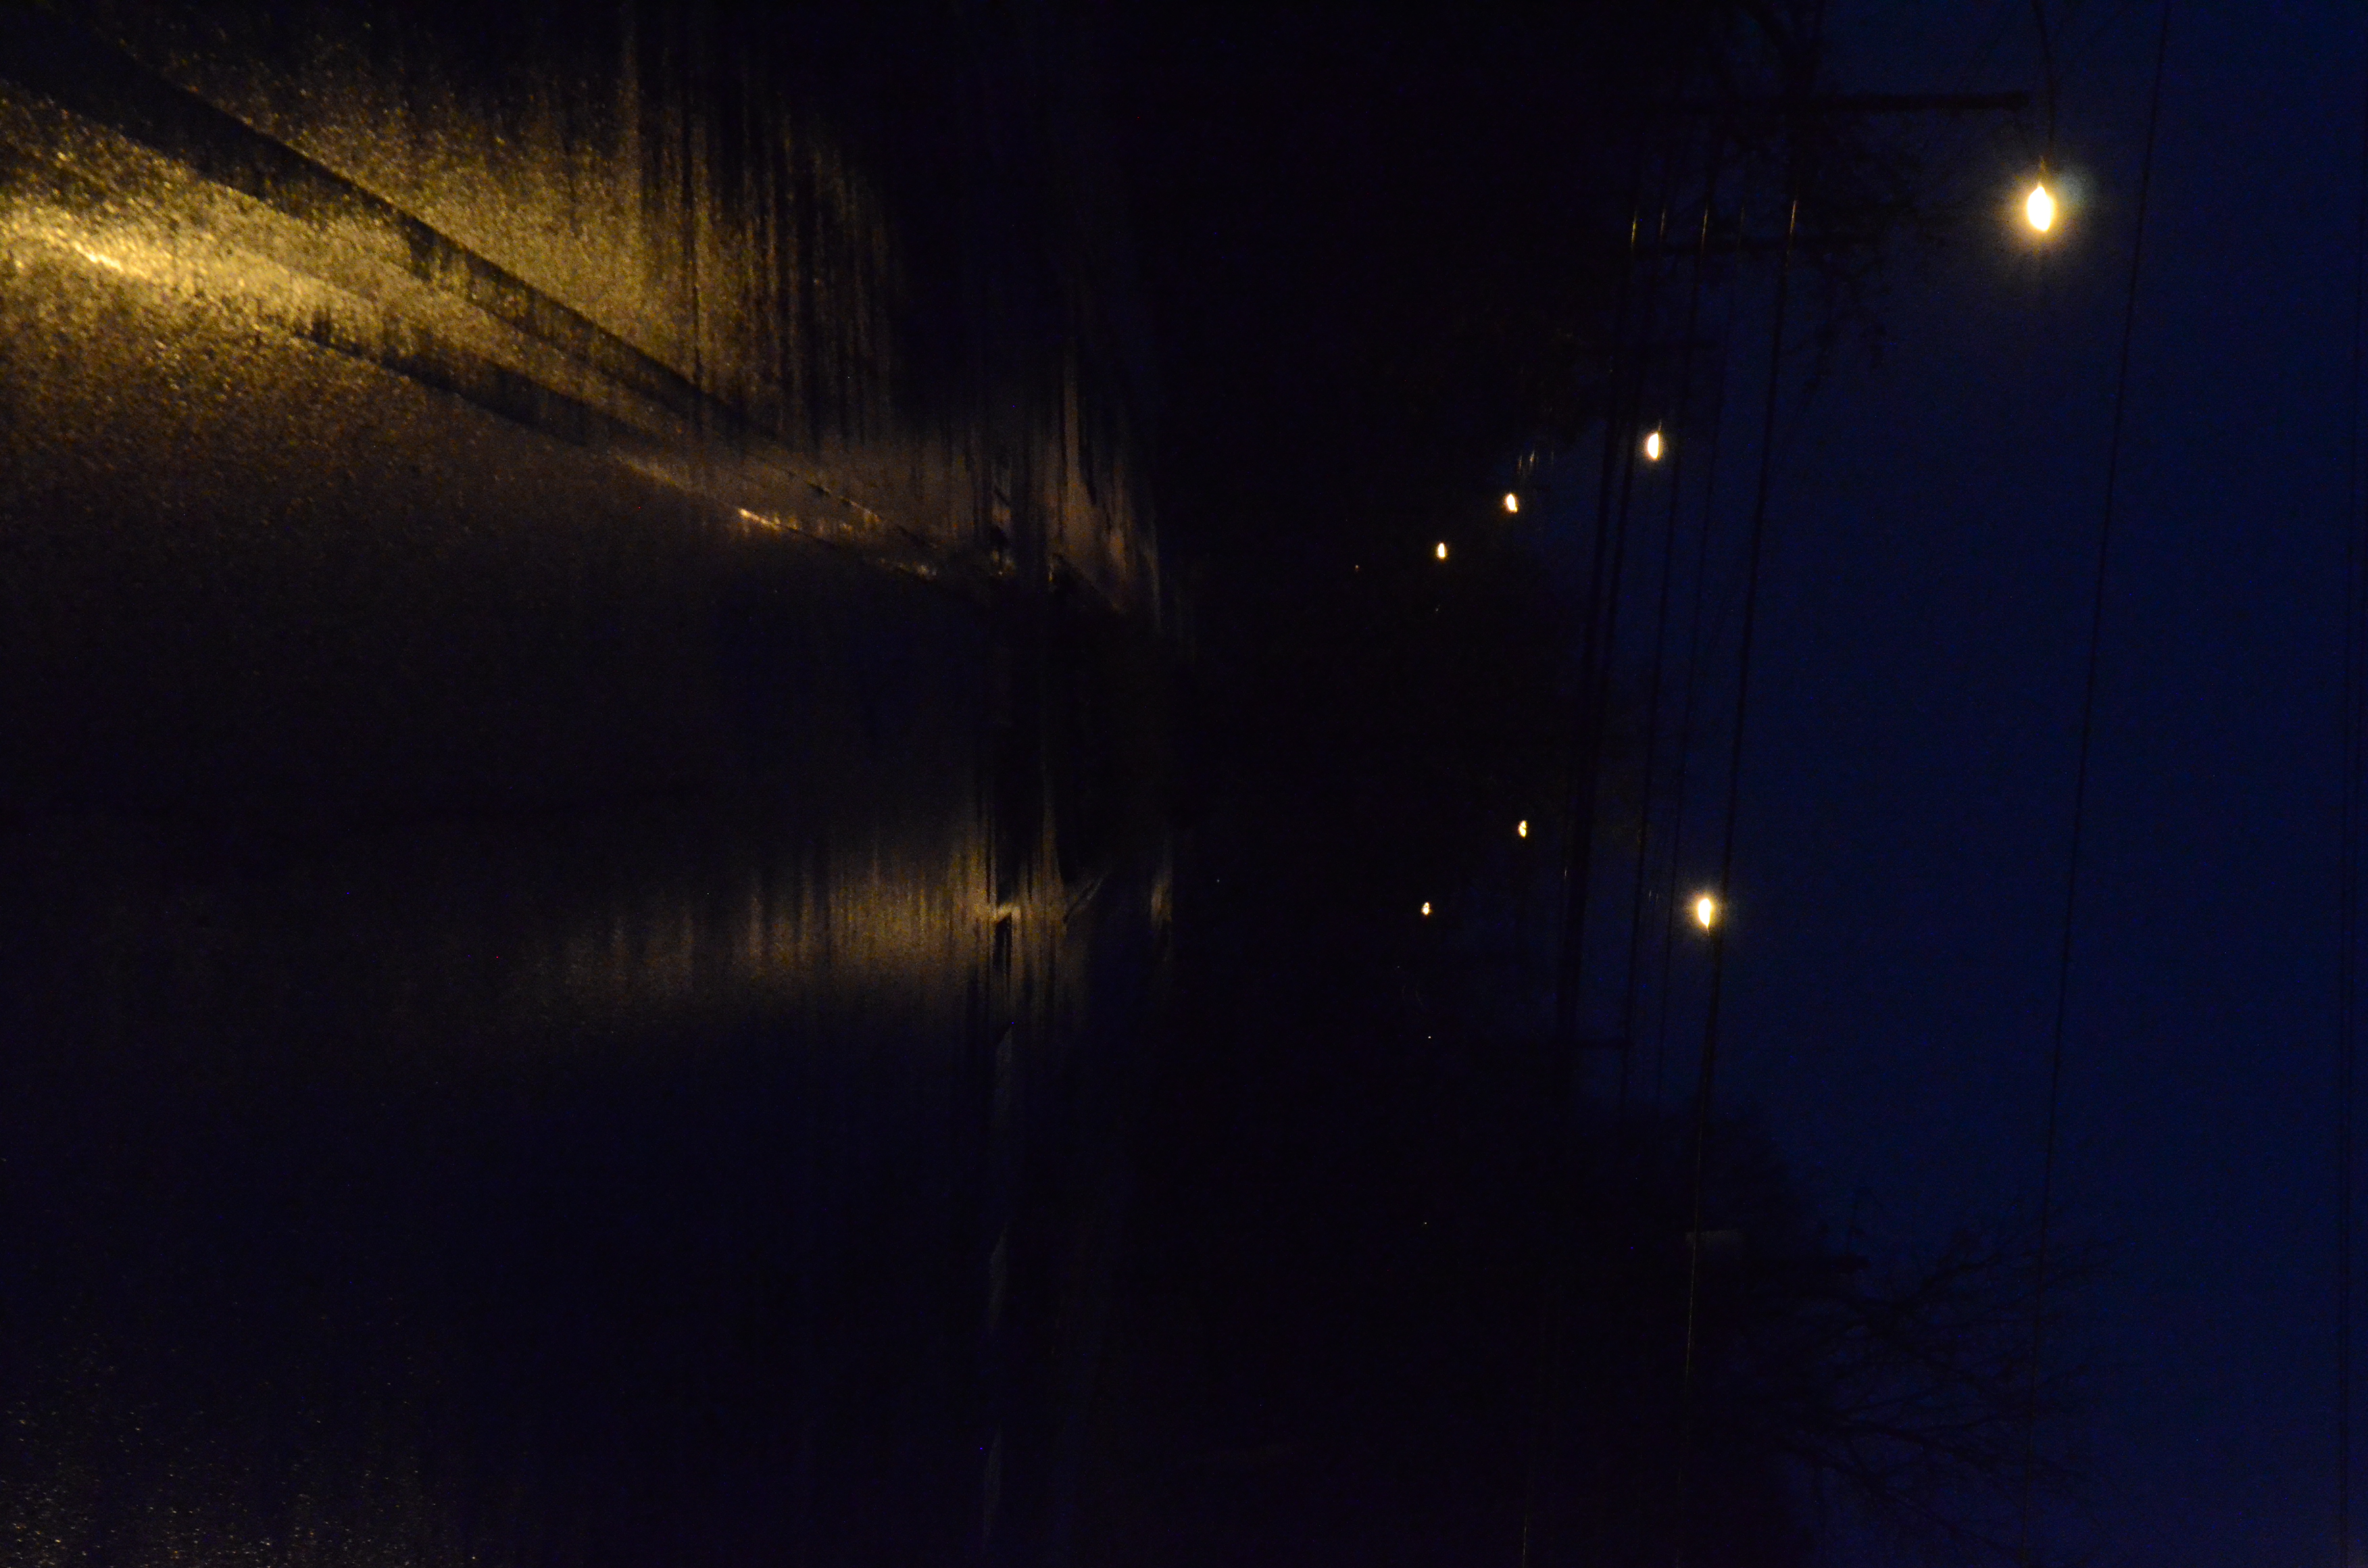 A picure of a road at night wich is very underexposed